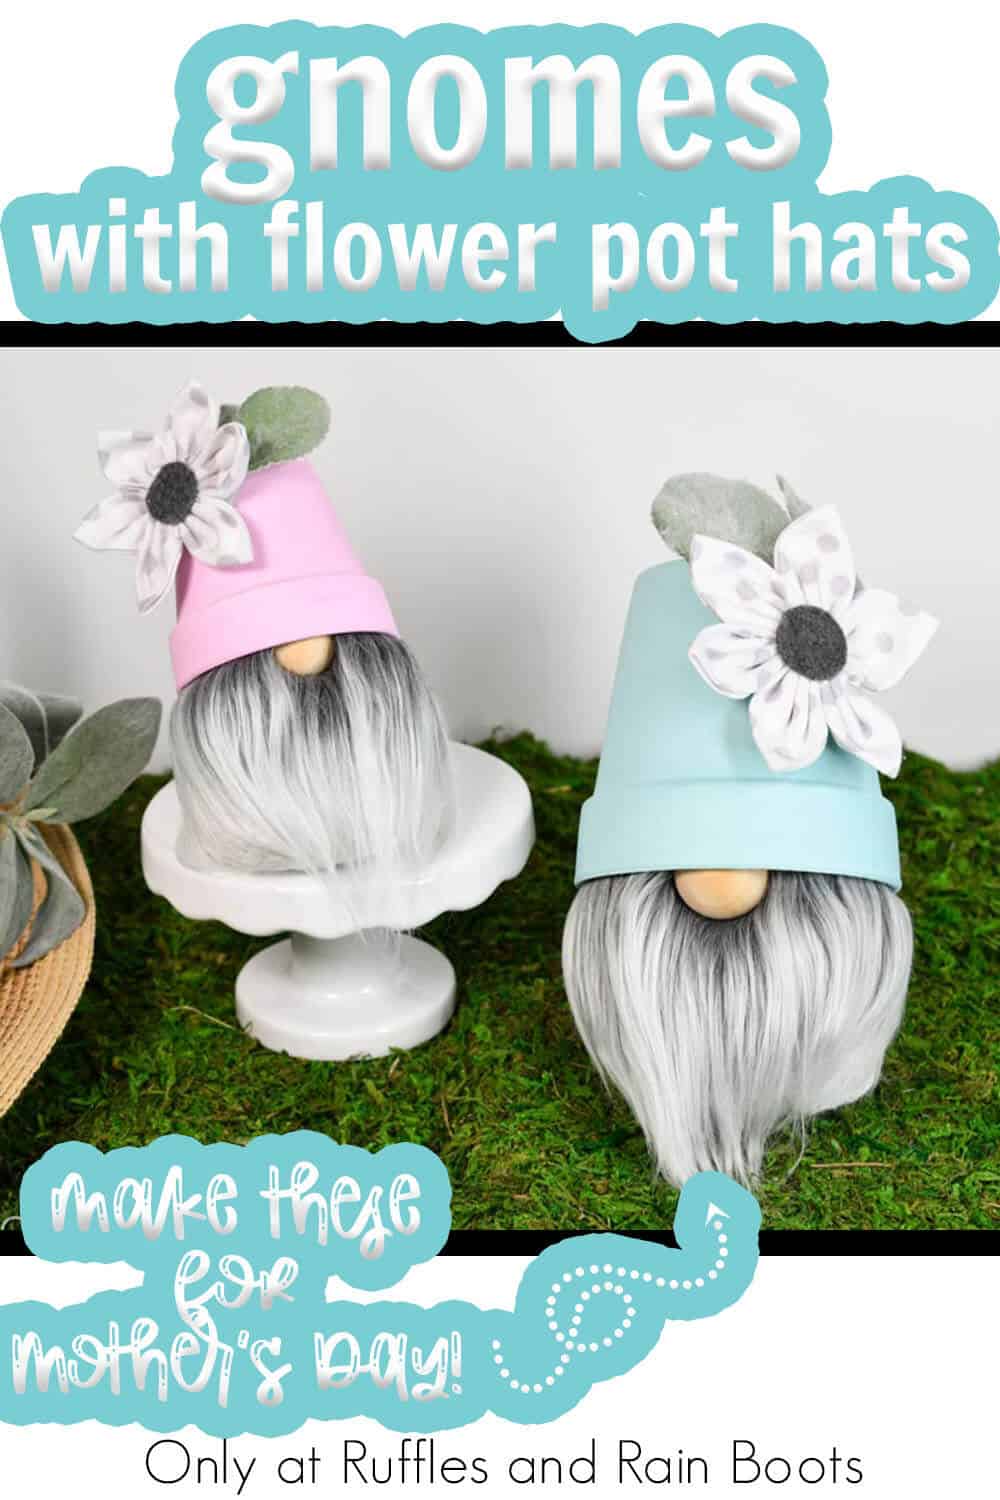 Flower pot hat sock gnome diy for mothers day with text which reads gnomes with flower pot hats make these for mothers day.